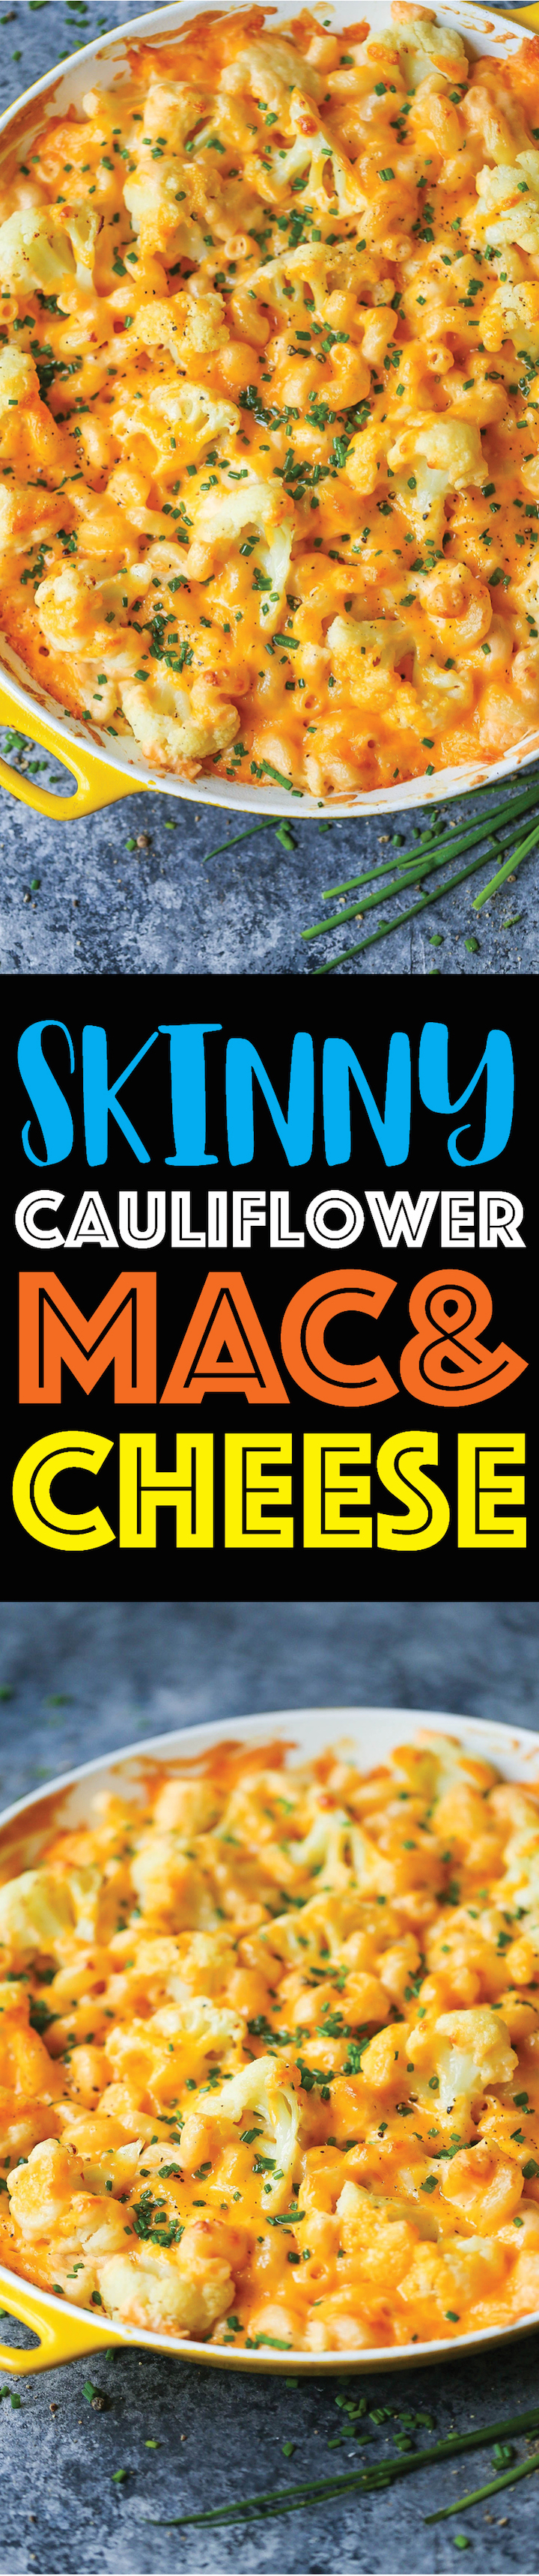 Skinny Cauliflower Mac and Cheese - Less fat AND less calories. Except taste and flavor is not compromised AT ALL! So cheesy, comforting and irresistible!